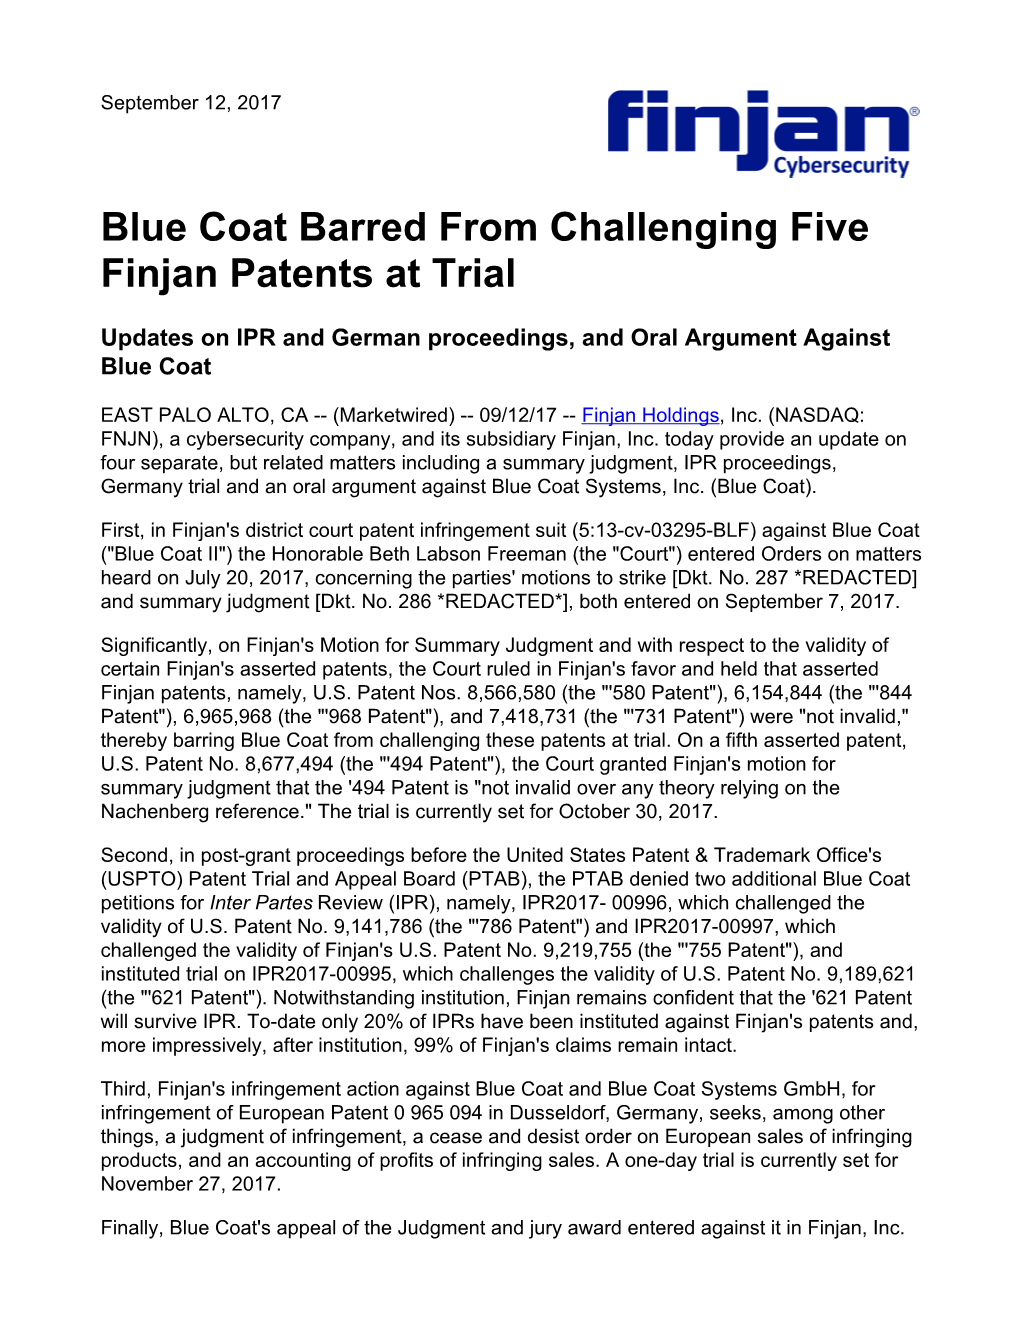 Blue Coat Barred from Challenging Five Finjan Patents at Trial